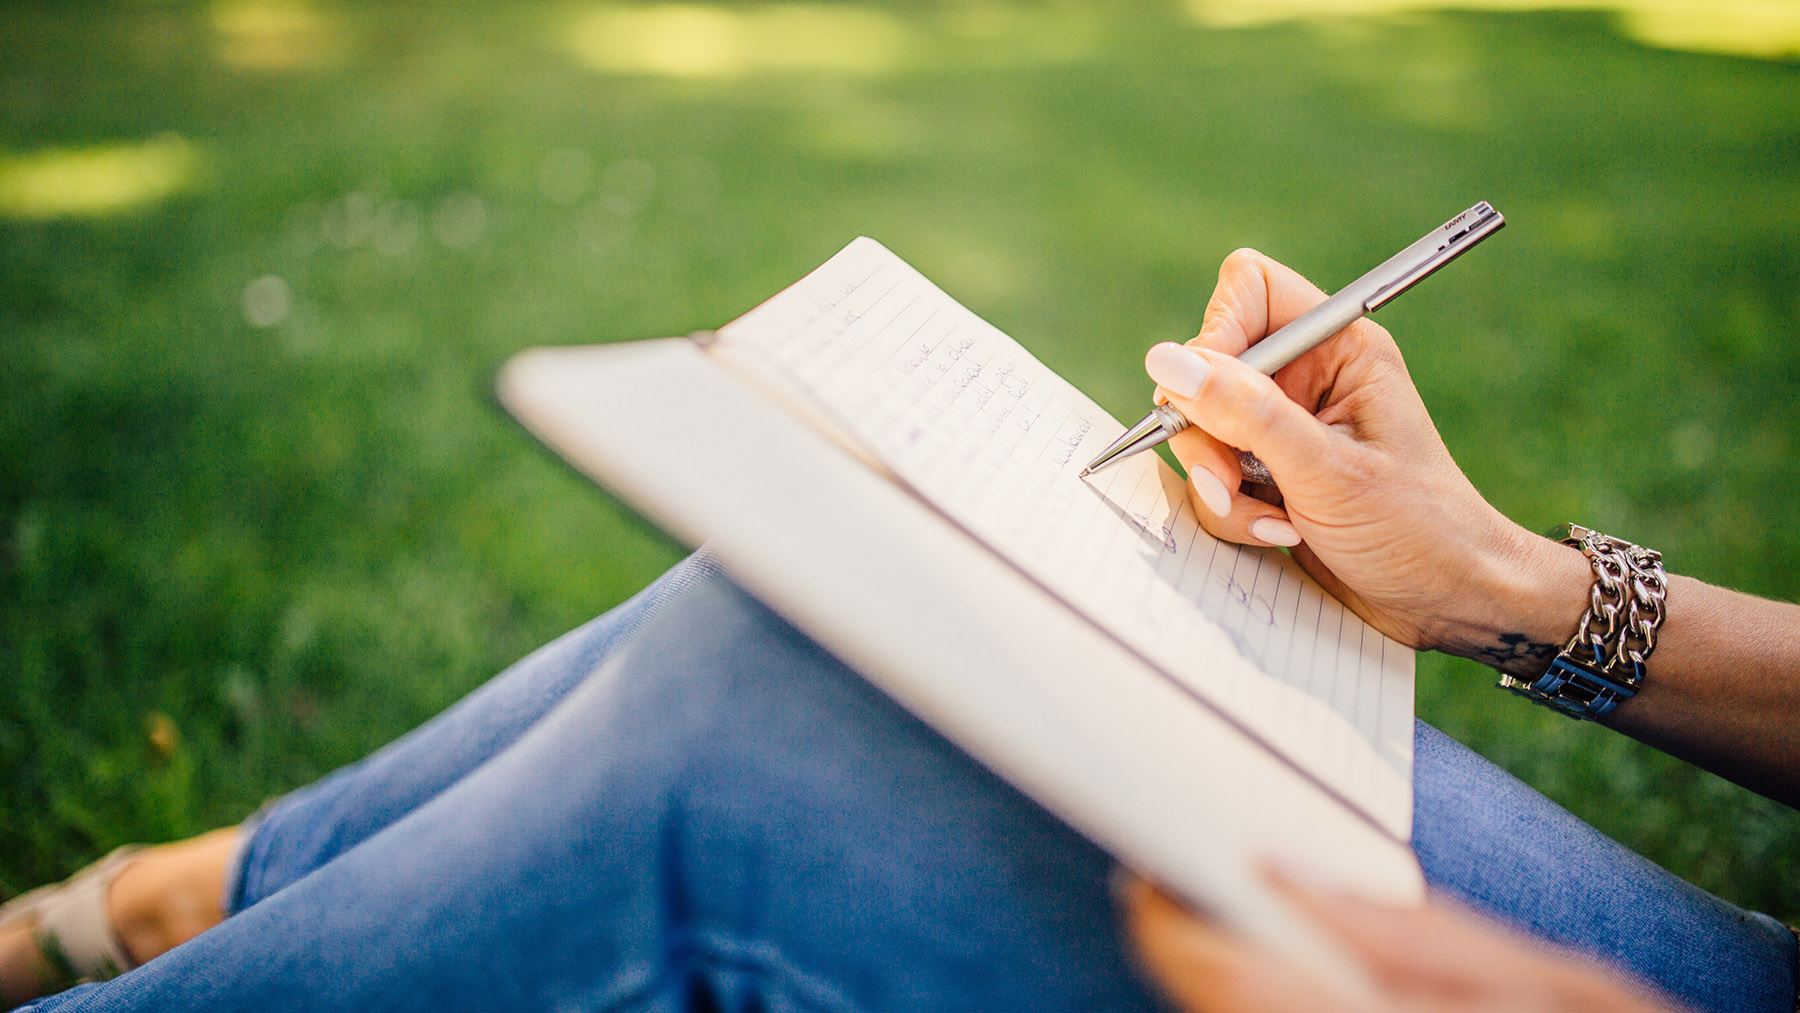 Stock photo of someone writing in a journal type book while sitting outdoors on a sunny day (Image by RawPixel.com)